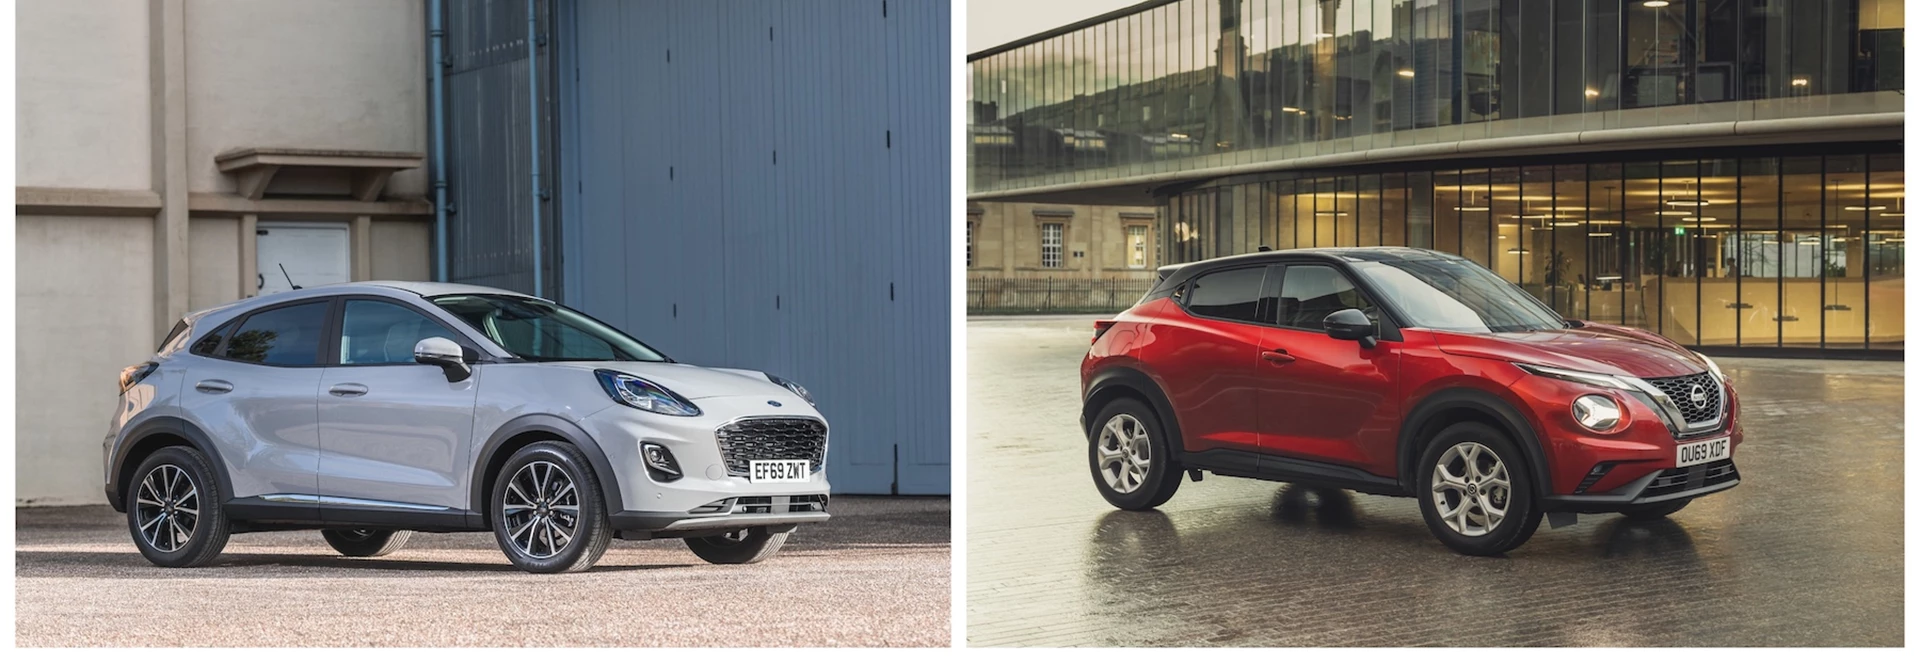 Ford Puma vs Nissan Juke. What’s the best compact crossover? 